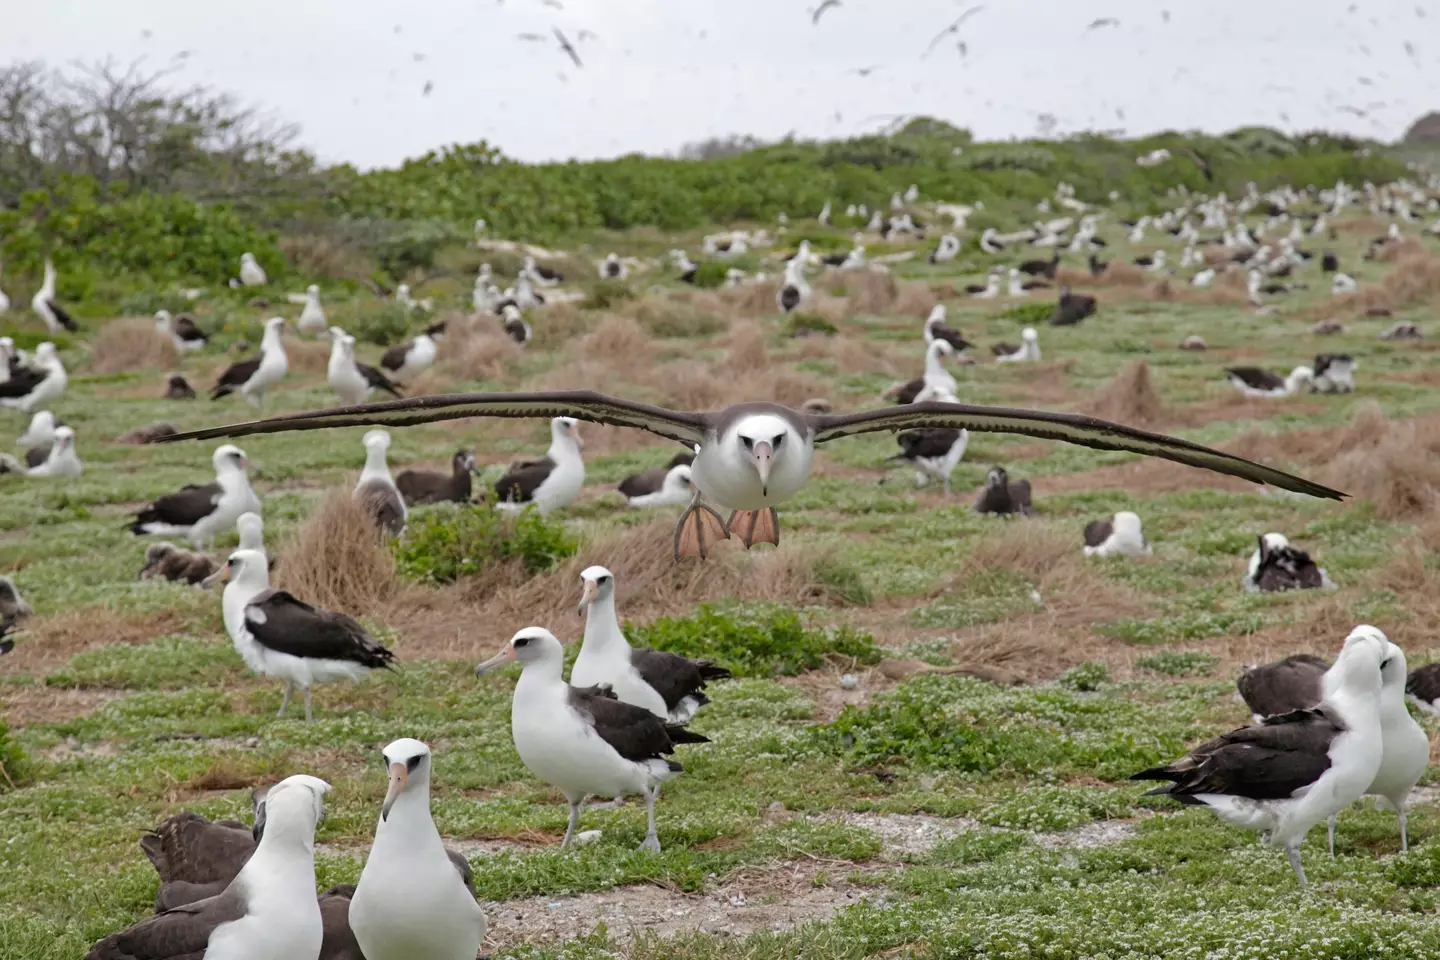 Midway Atoll is known for its large bird population, including rare breeds of albatross.